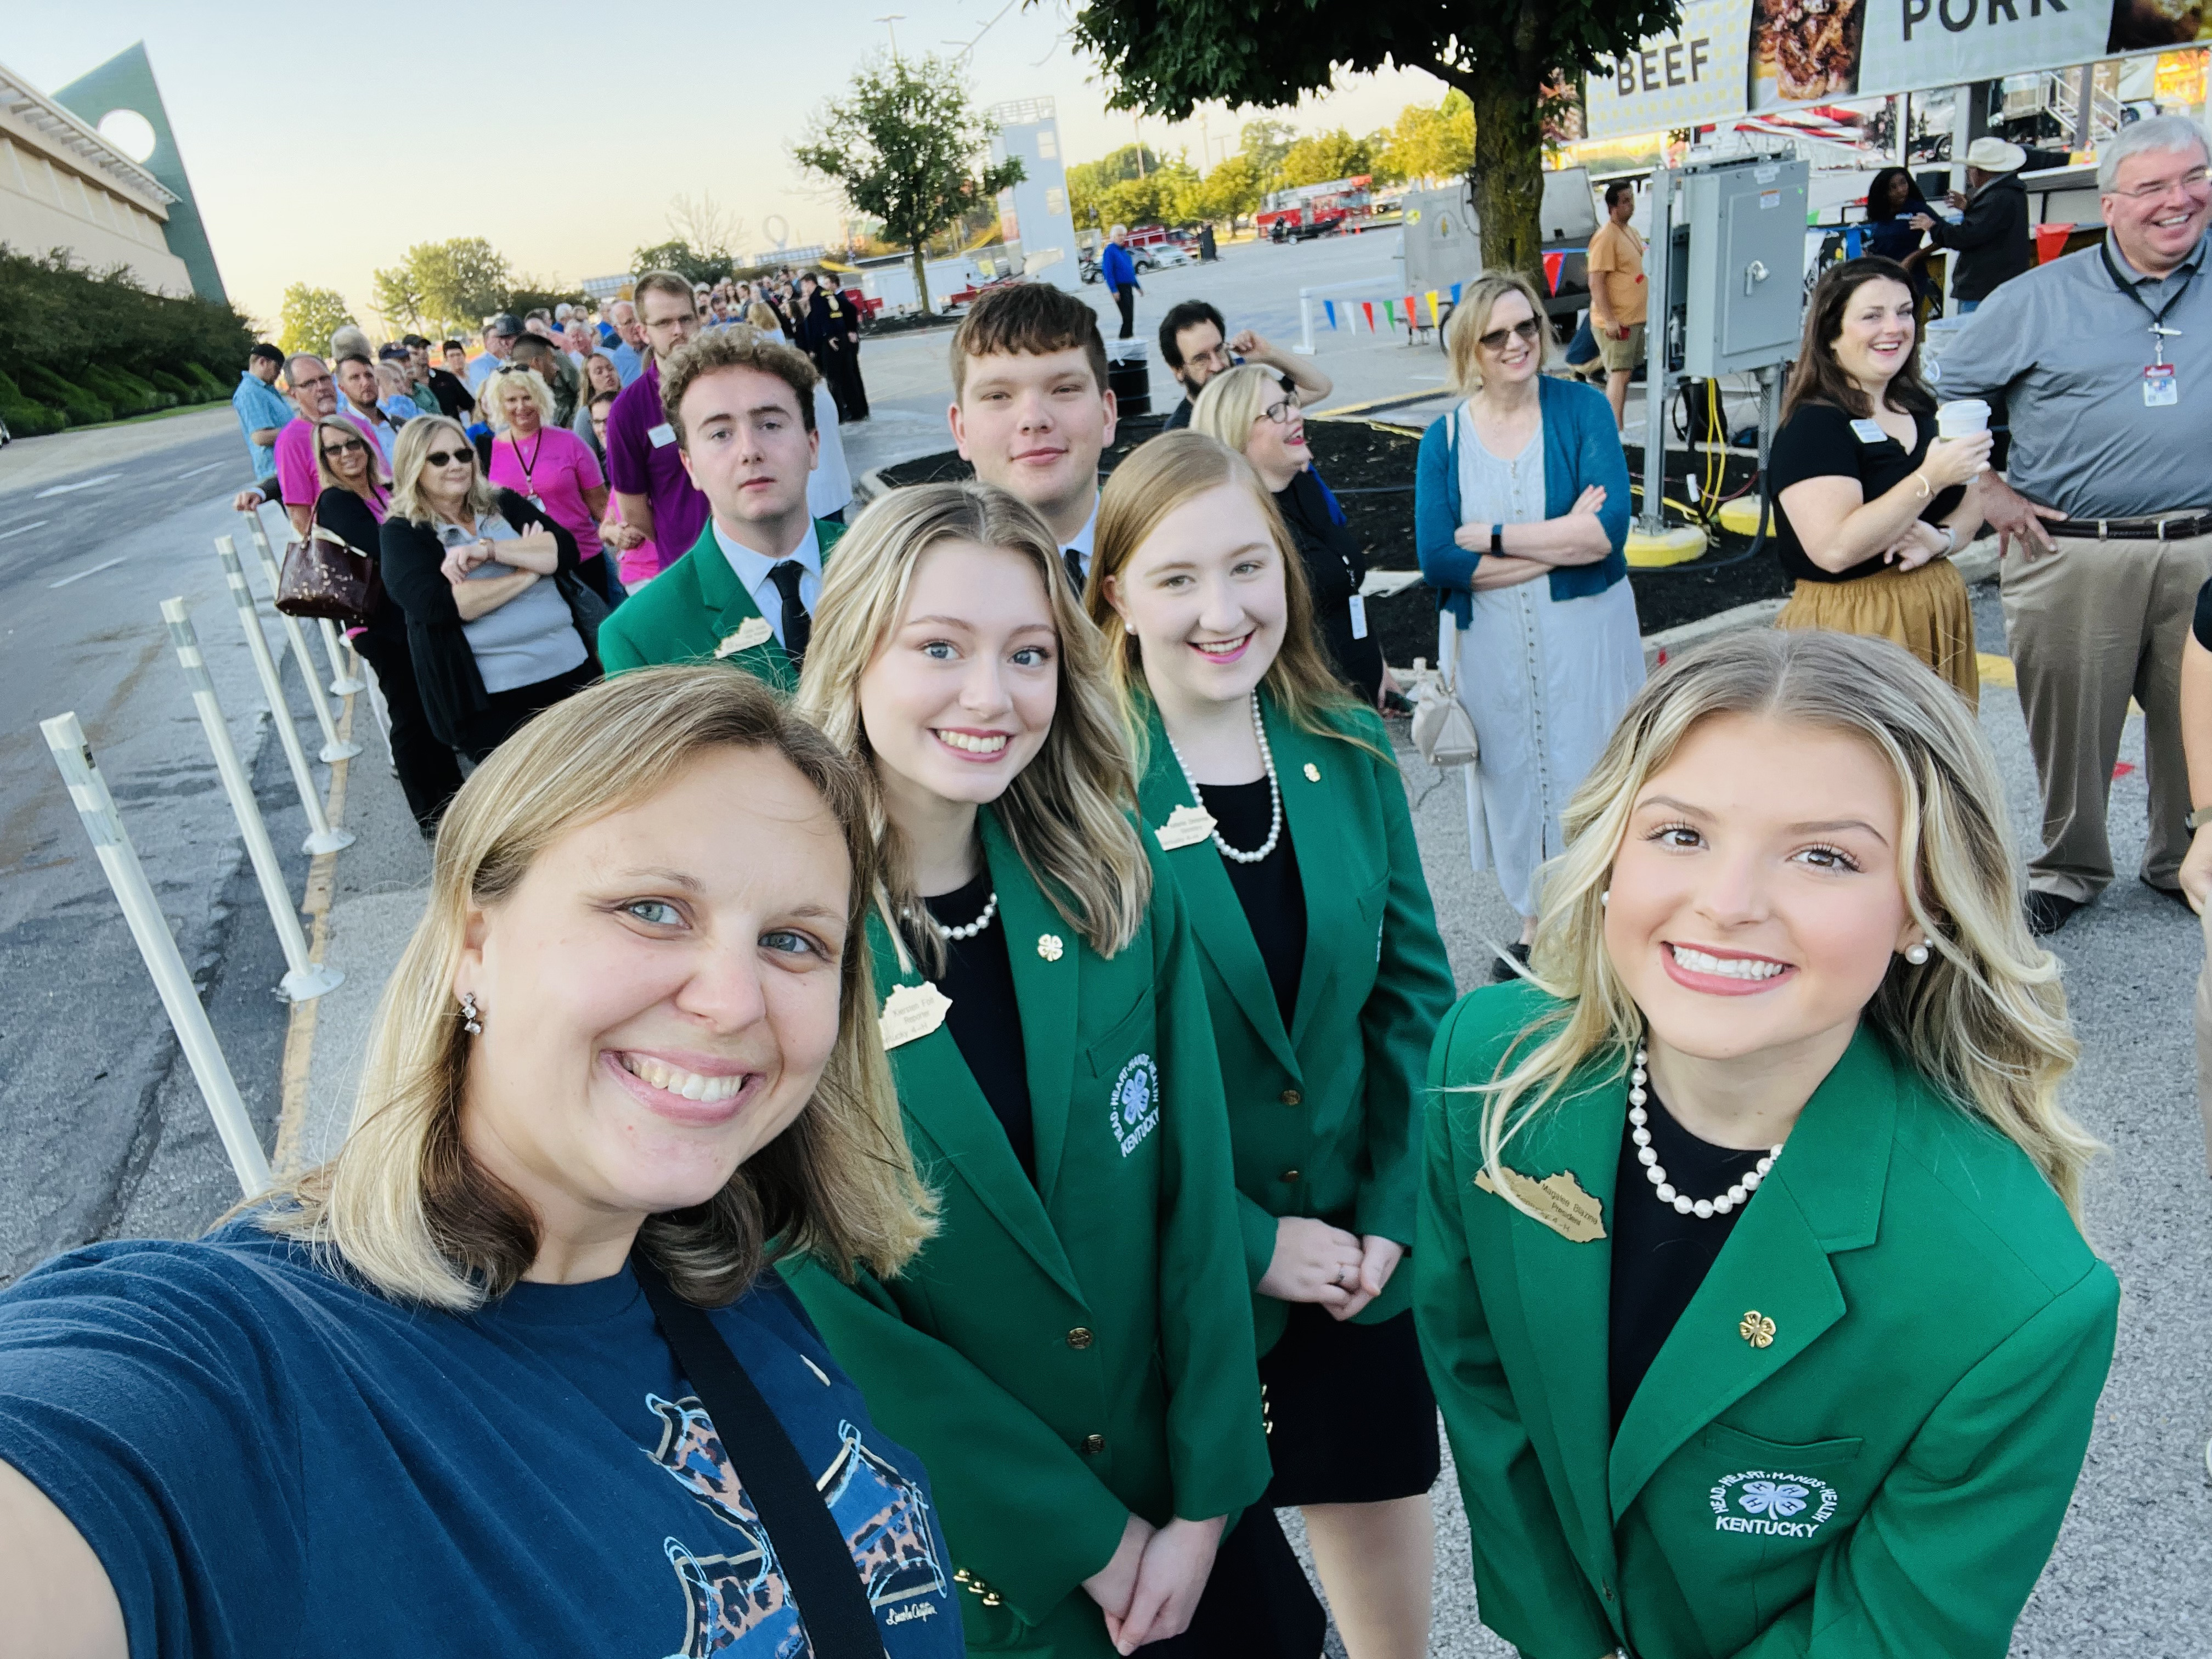 4-H members at an event